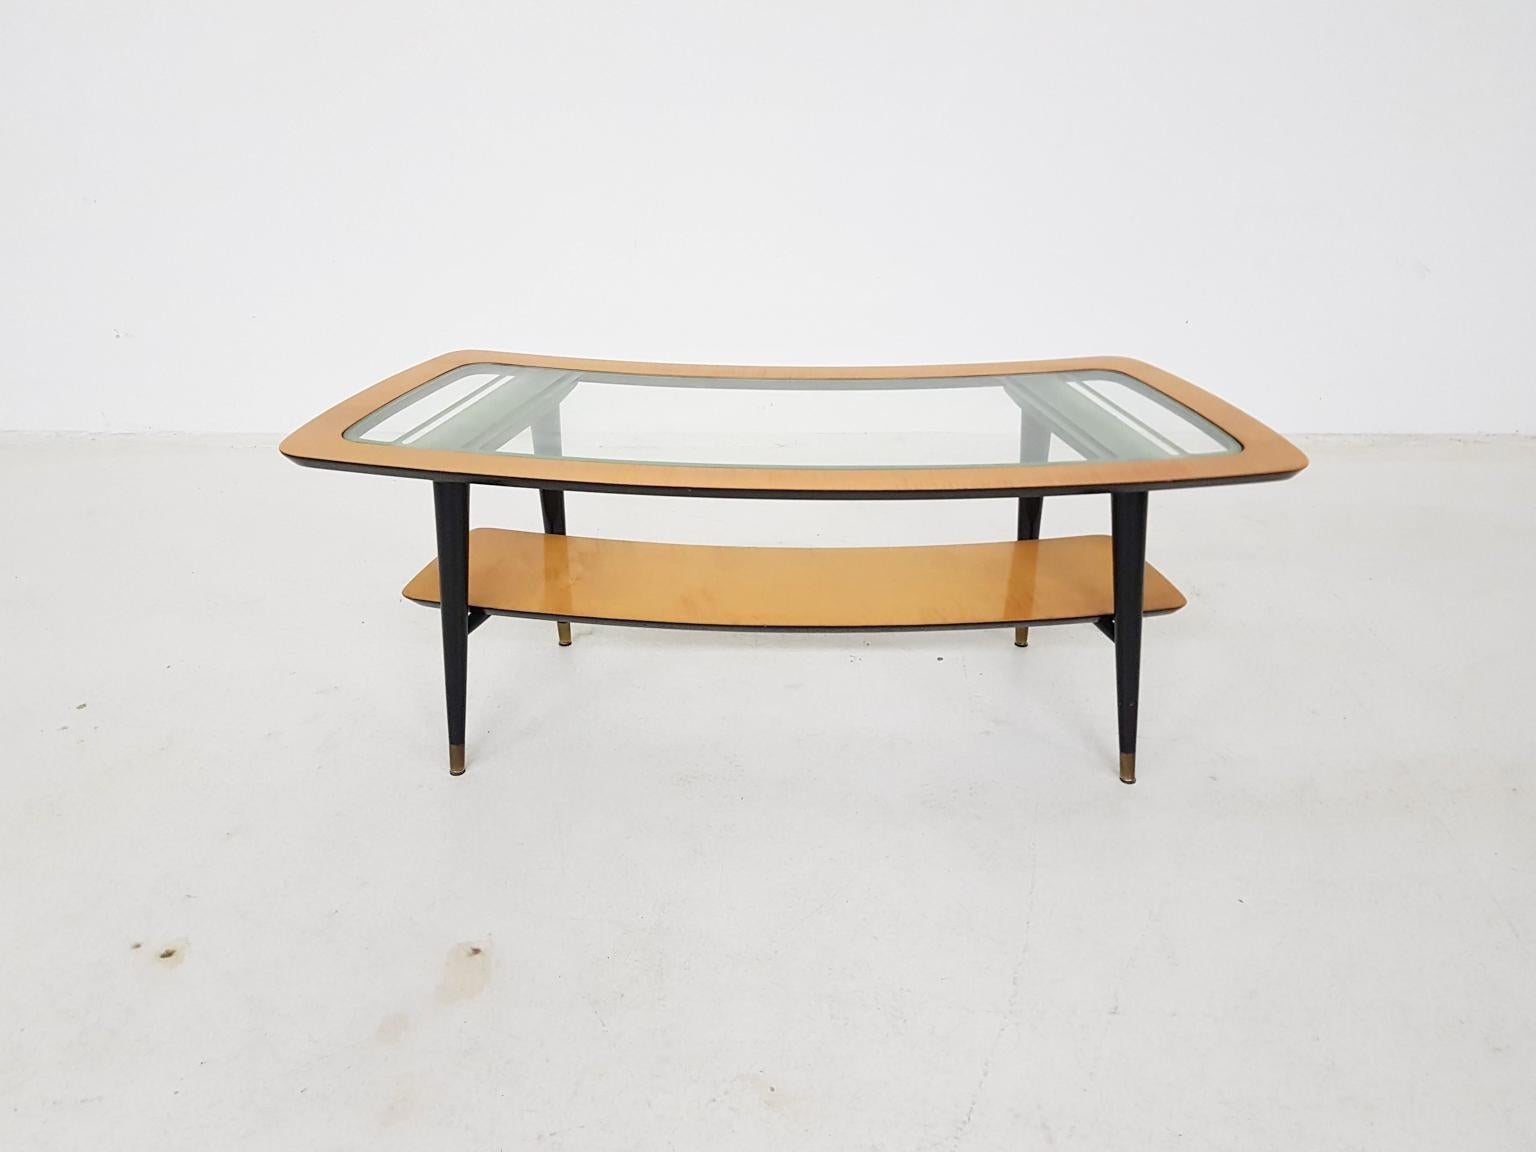 High end boomerang shaped coffee table in birch wood. The legs are black lacquered and have brass feet. It has a glass top with a beautiful sandblasted pattern to hide the construction of the table. It's Italian and in the manner of Gio Ponti and